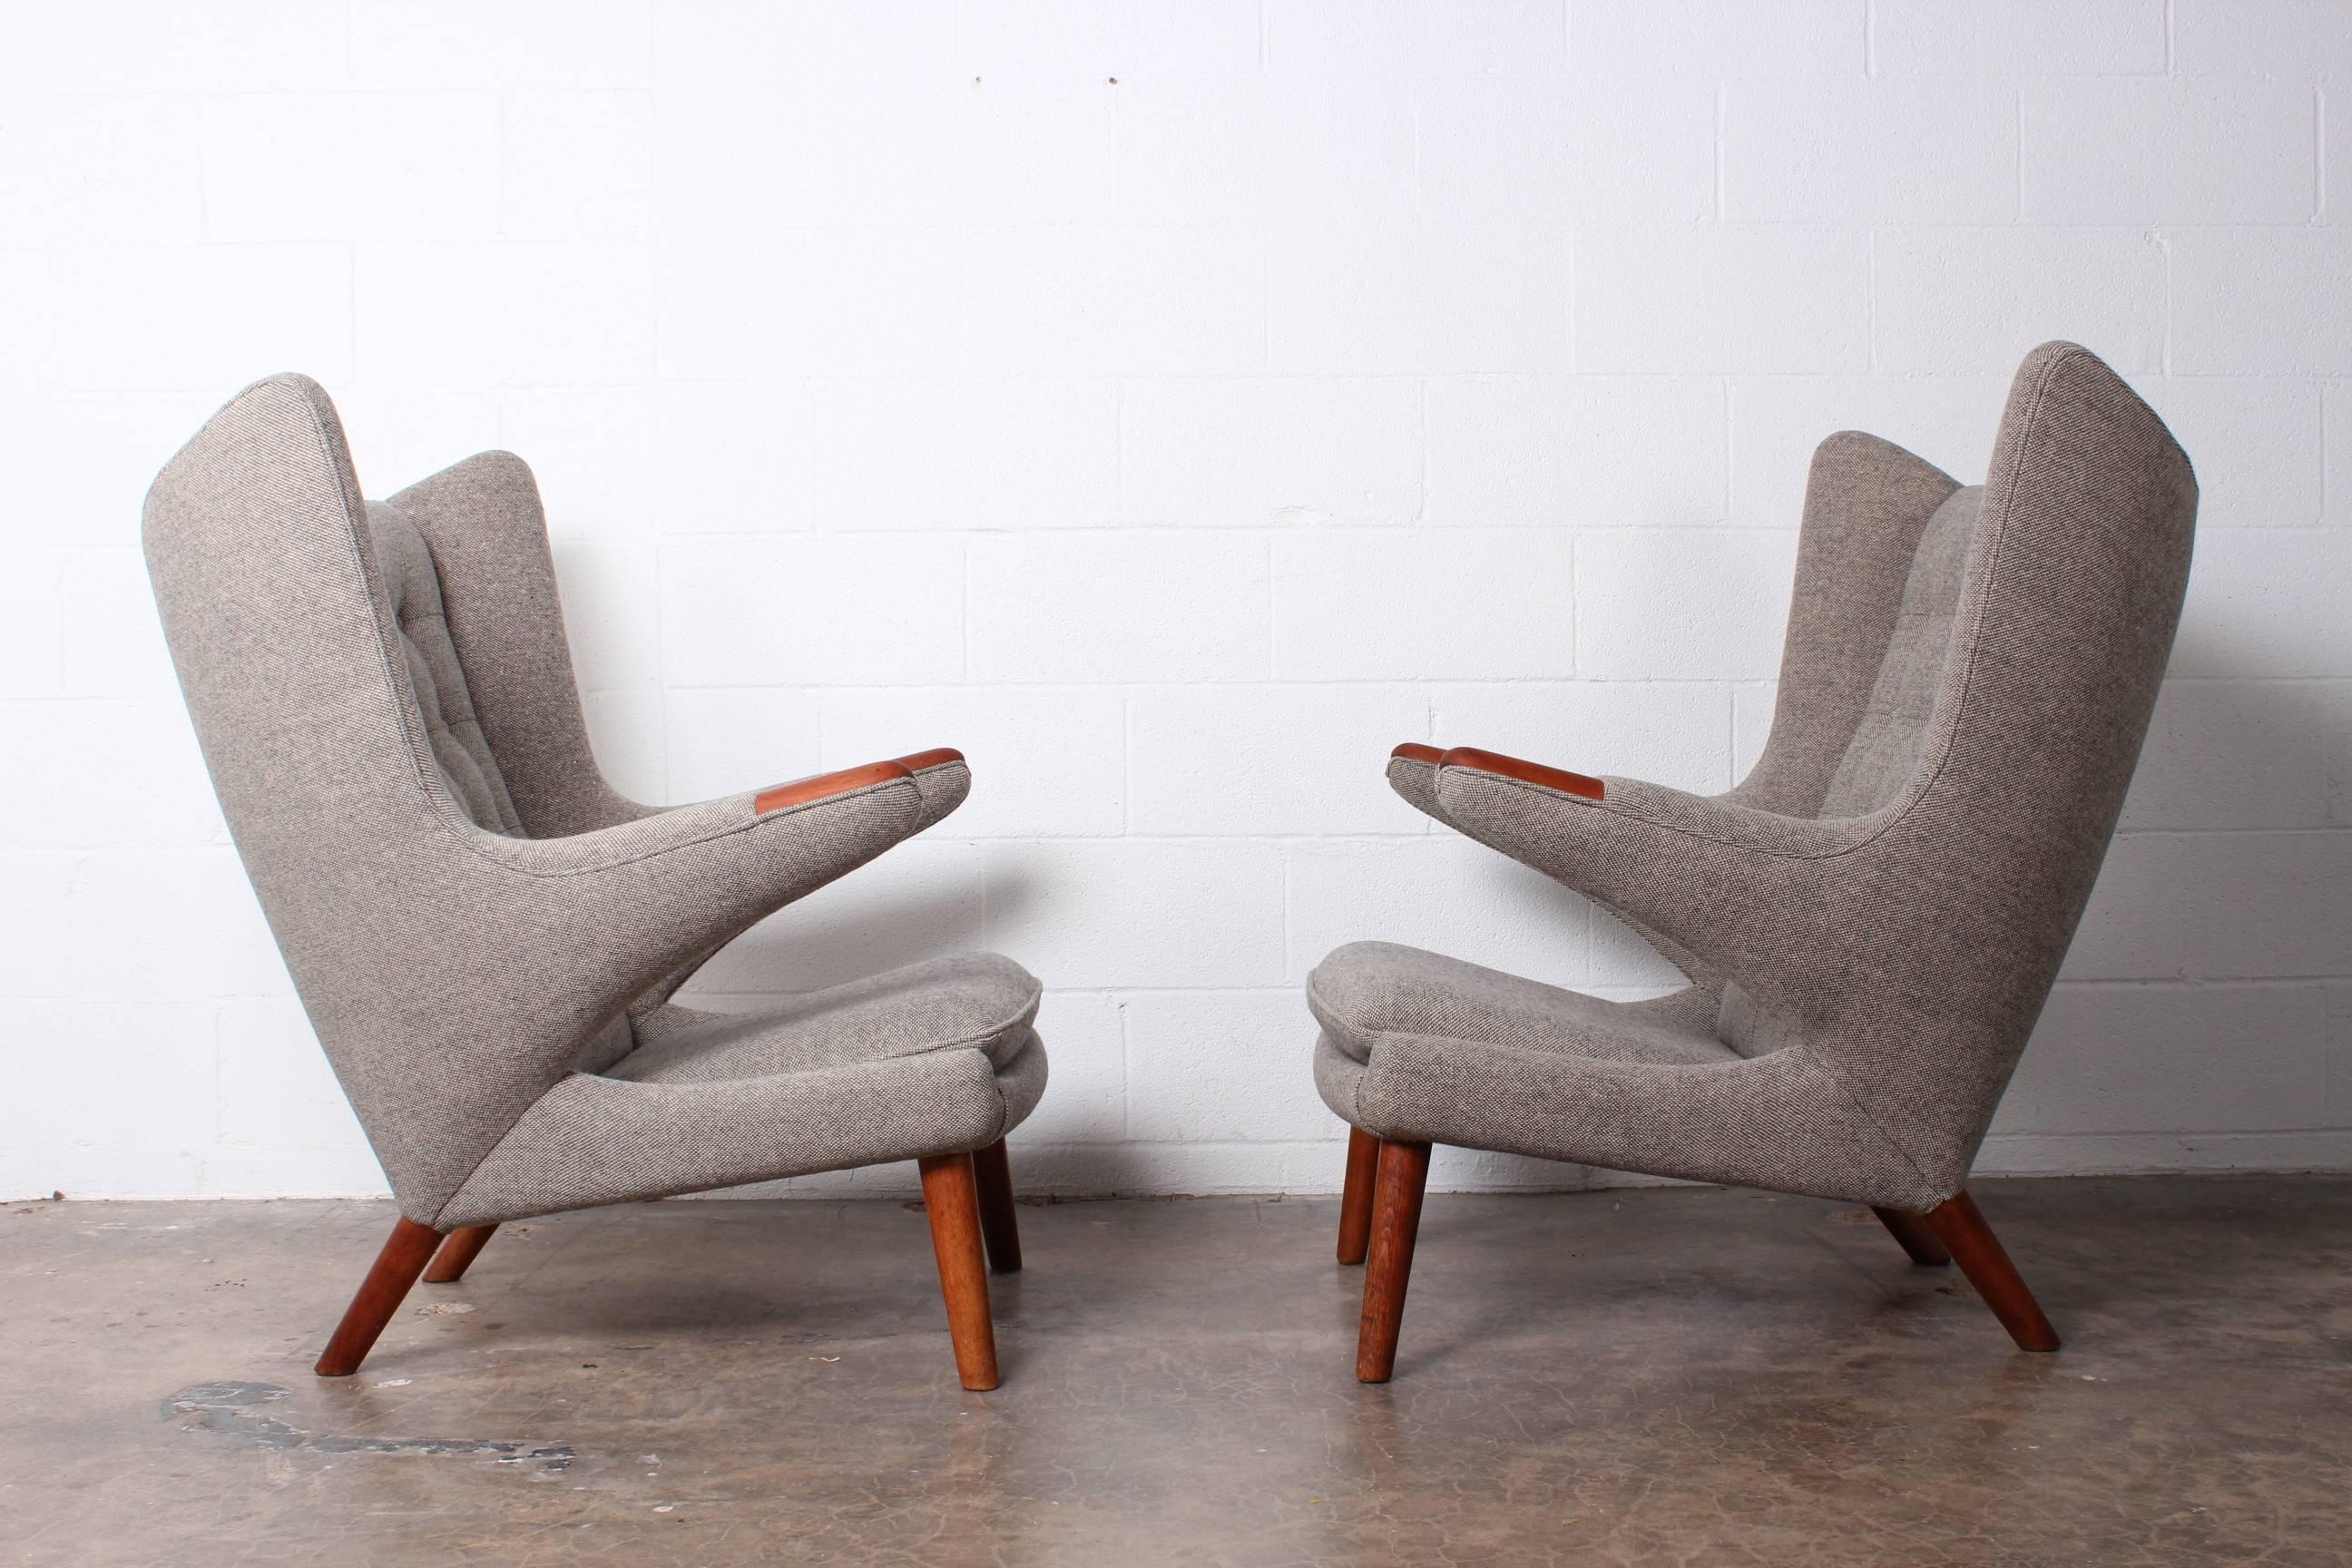 A matching pair of Papa bear chairs designed by Hans Wegner for AP Stolen. The chairs have been reupholstered with Maharam wool. The straps and teak retain their original patina.